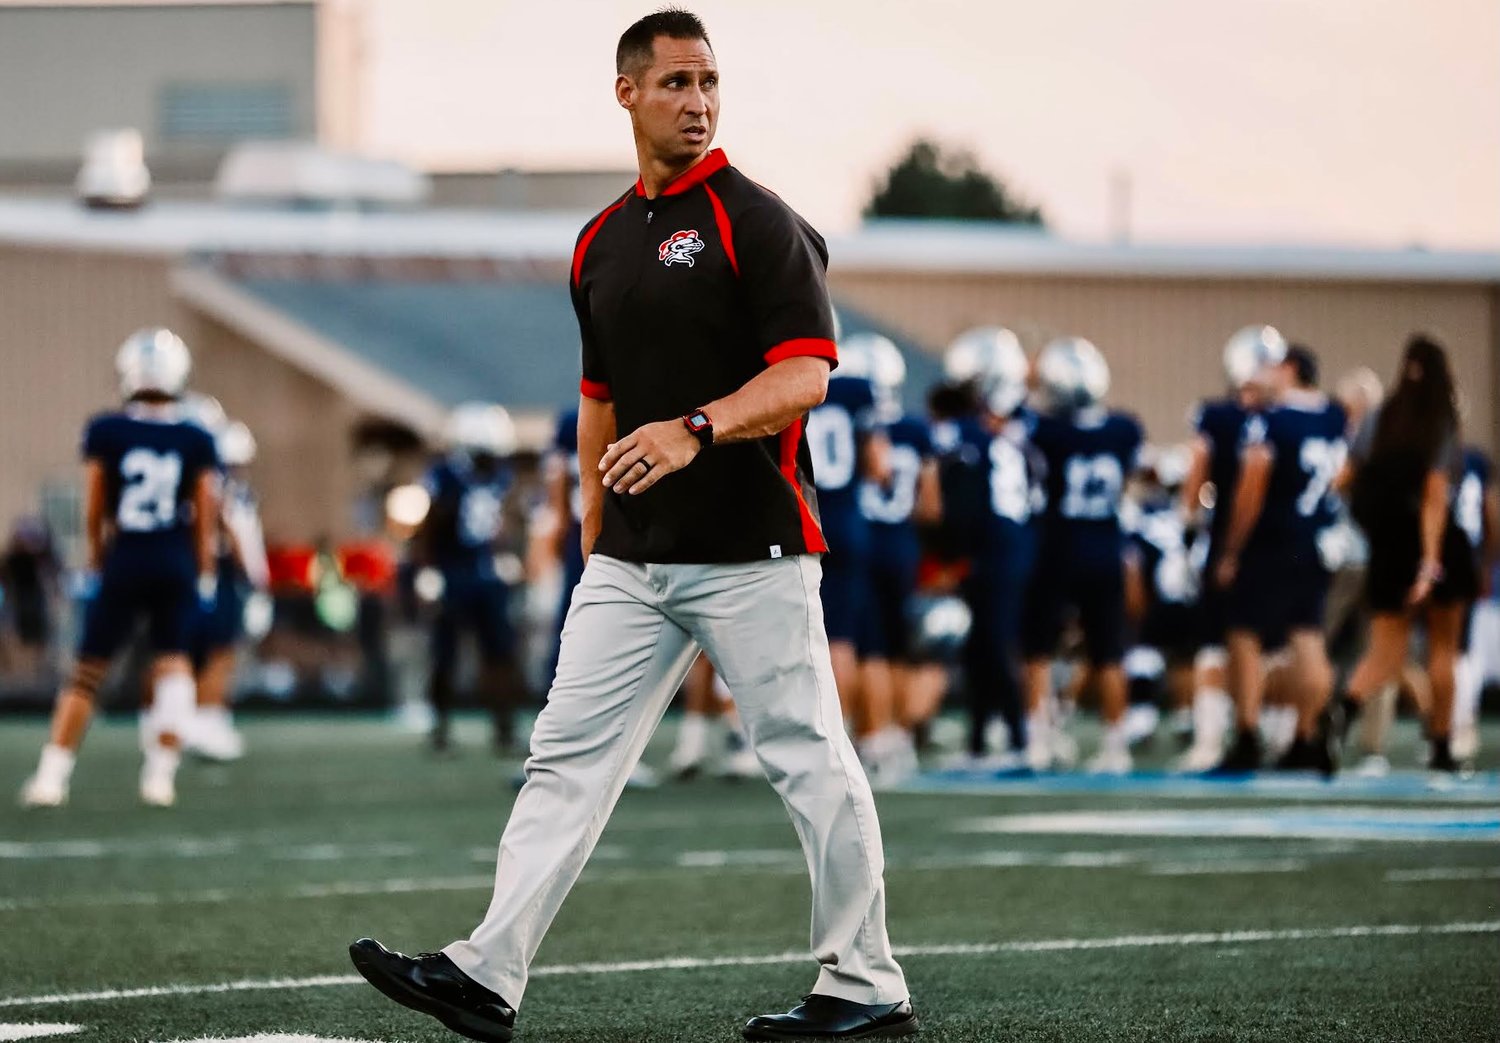 JEREMY CORDELL has been hired as Ozark's new football coach.